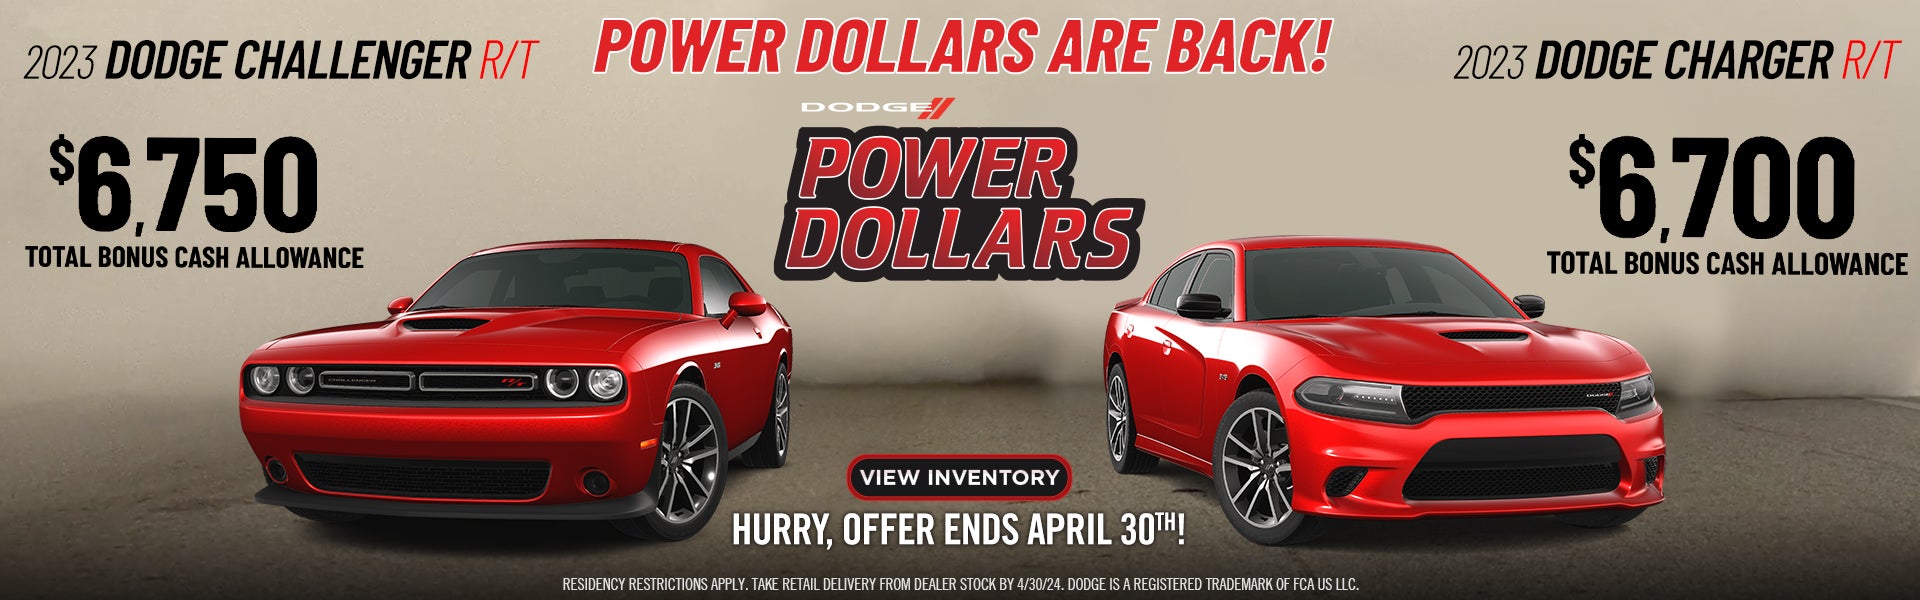 Power Dollars are Back!